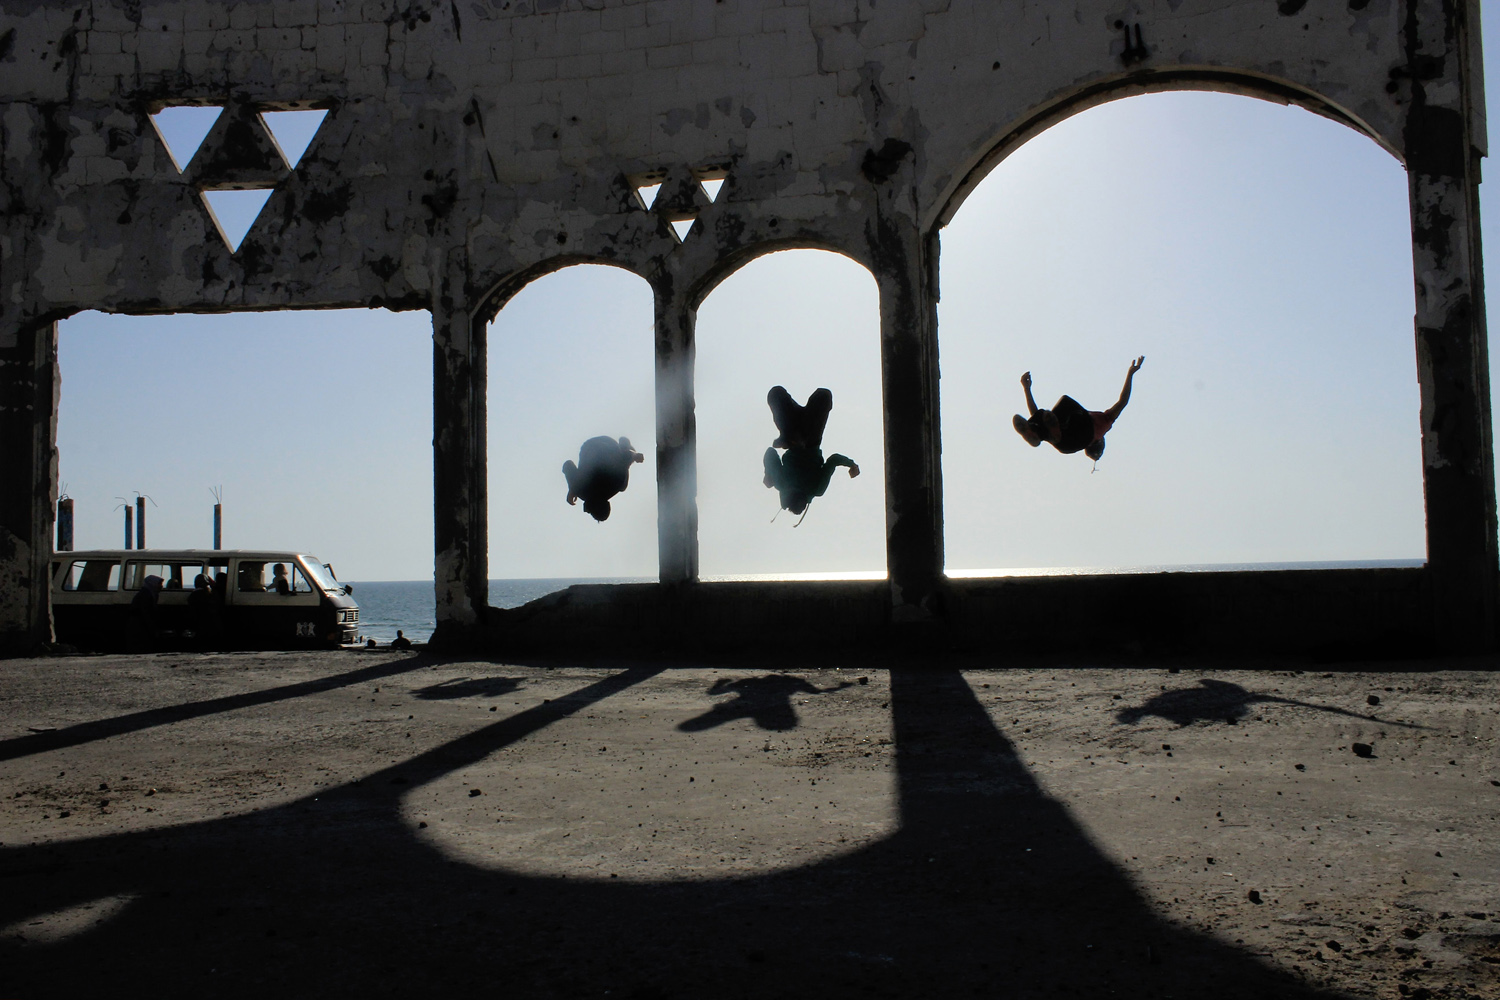 Apr. 4, 2014. A Parkour team practicing in Al-Waha, close to Al-Sodania, that had been bombed in the last war on Gaza.